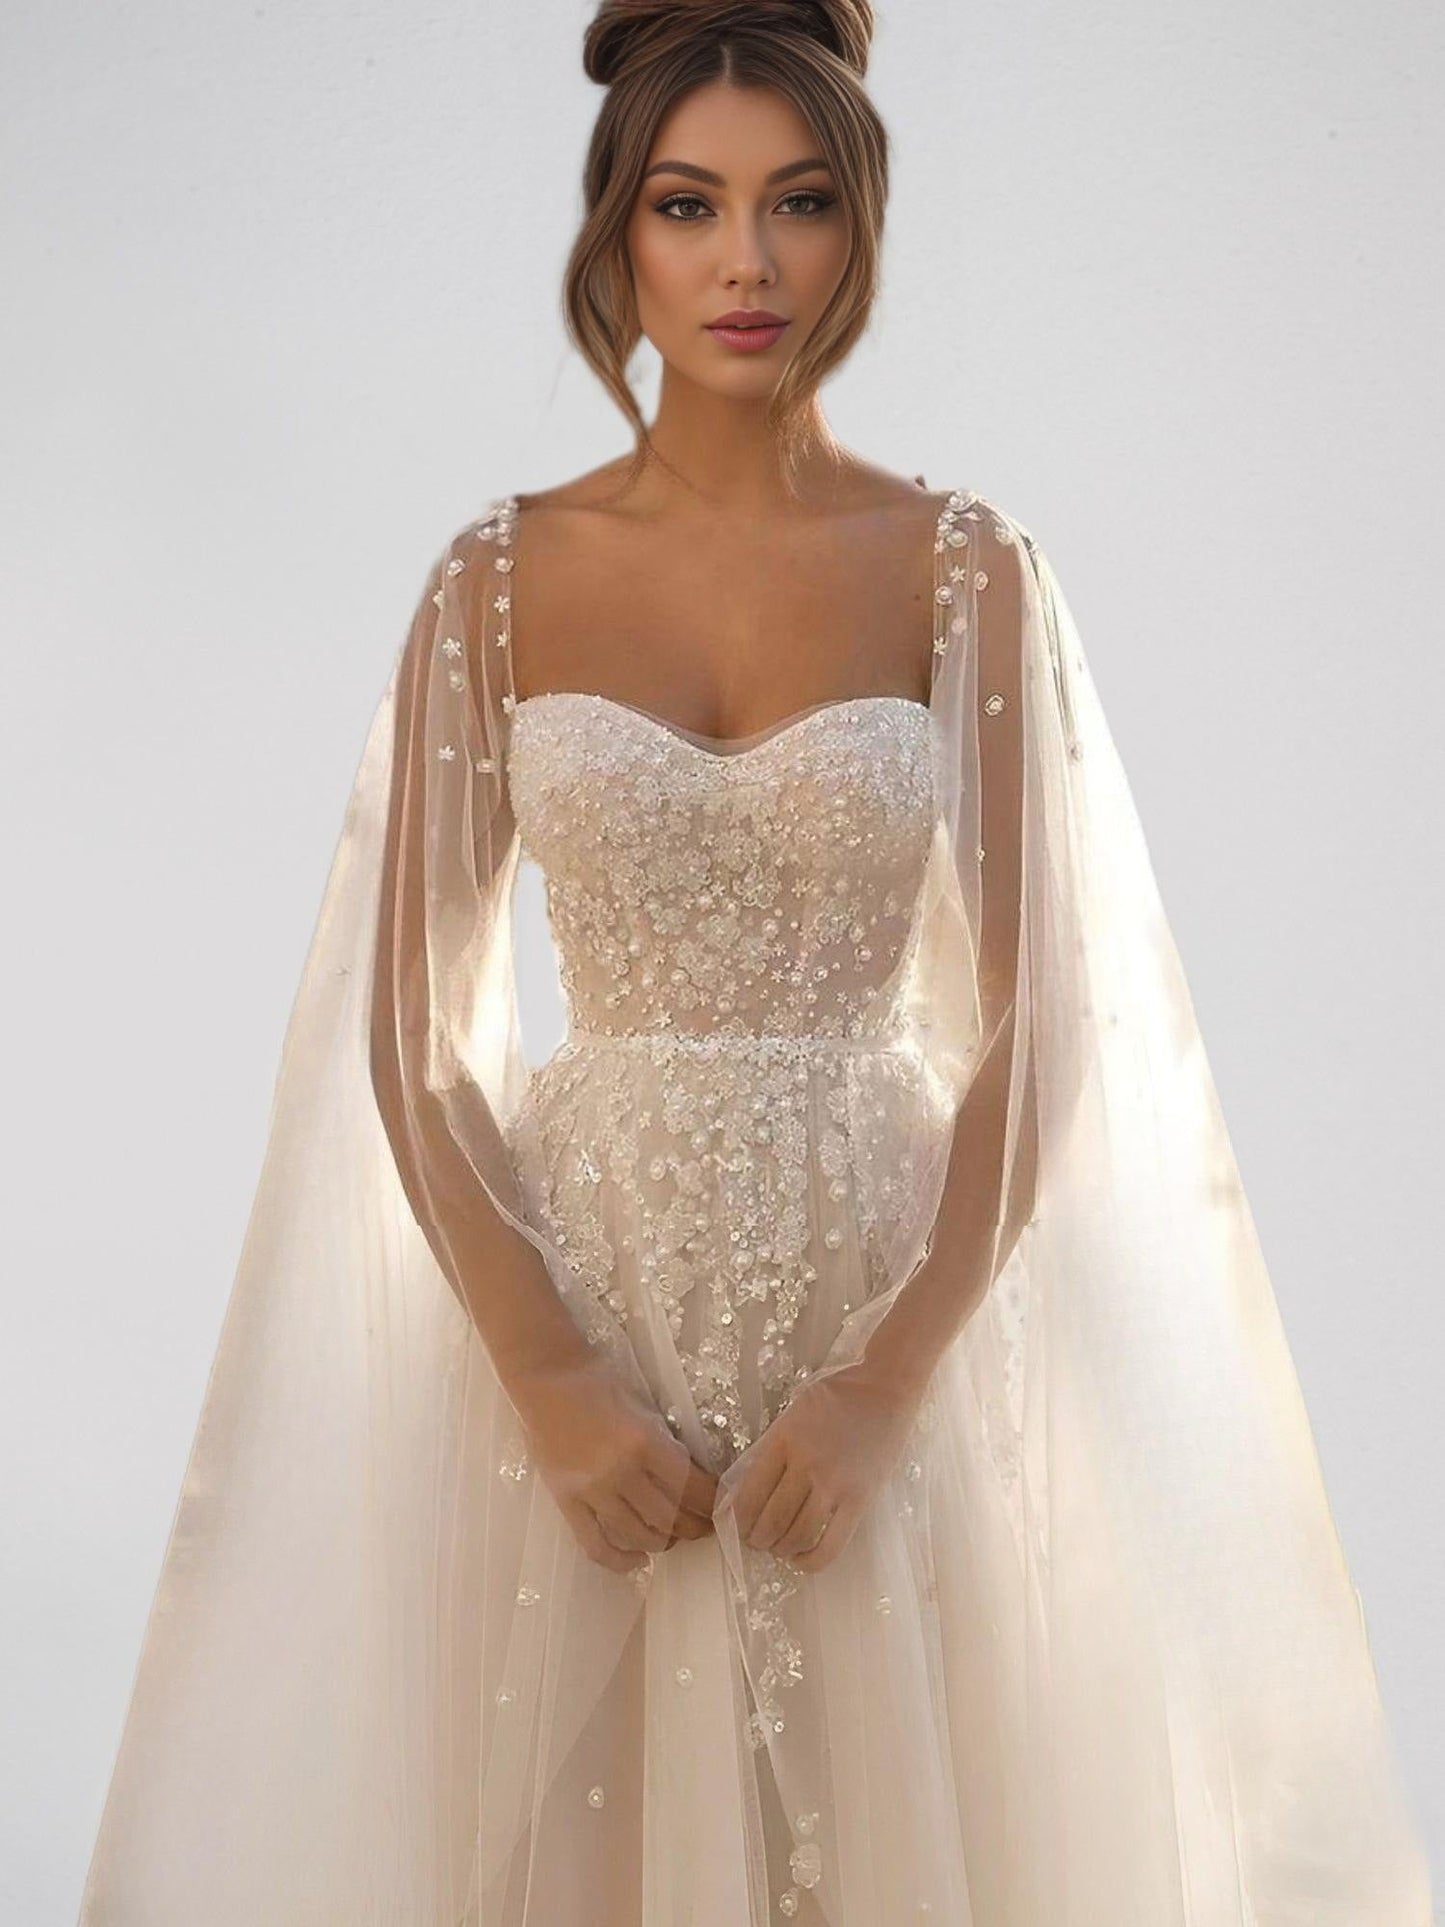 Bride in sheer bridal gown with pearl and lace accents on top and cape sleeves 